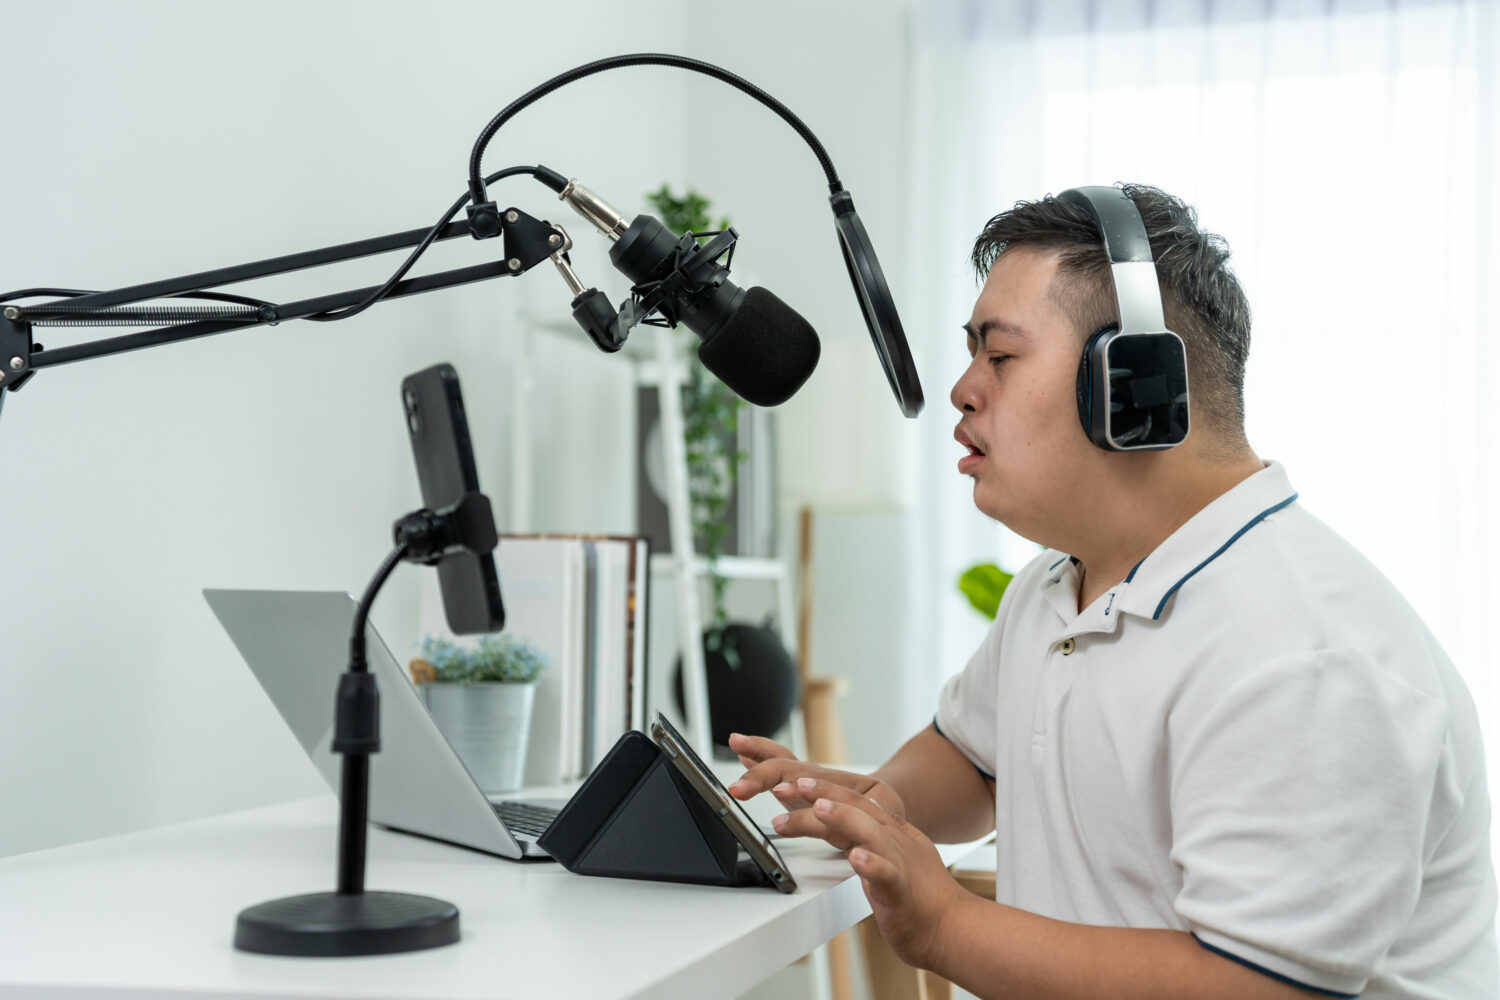 Asian man with down syndrome wearing headphones and white shirt sits at desk and speaks into microphone